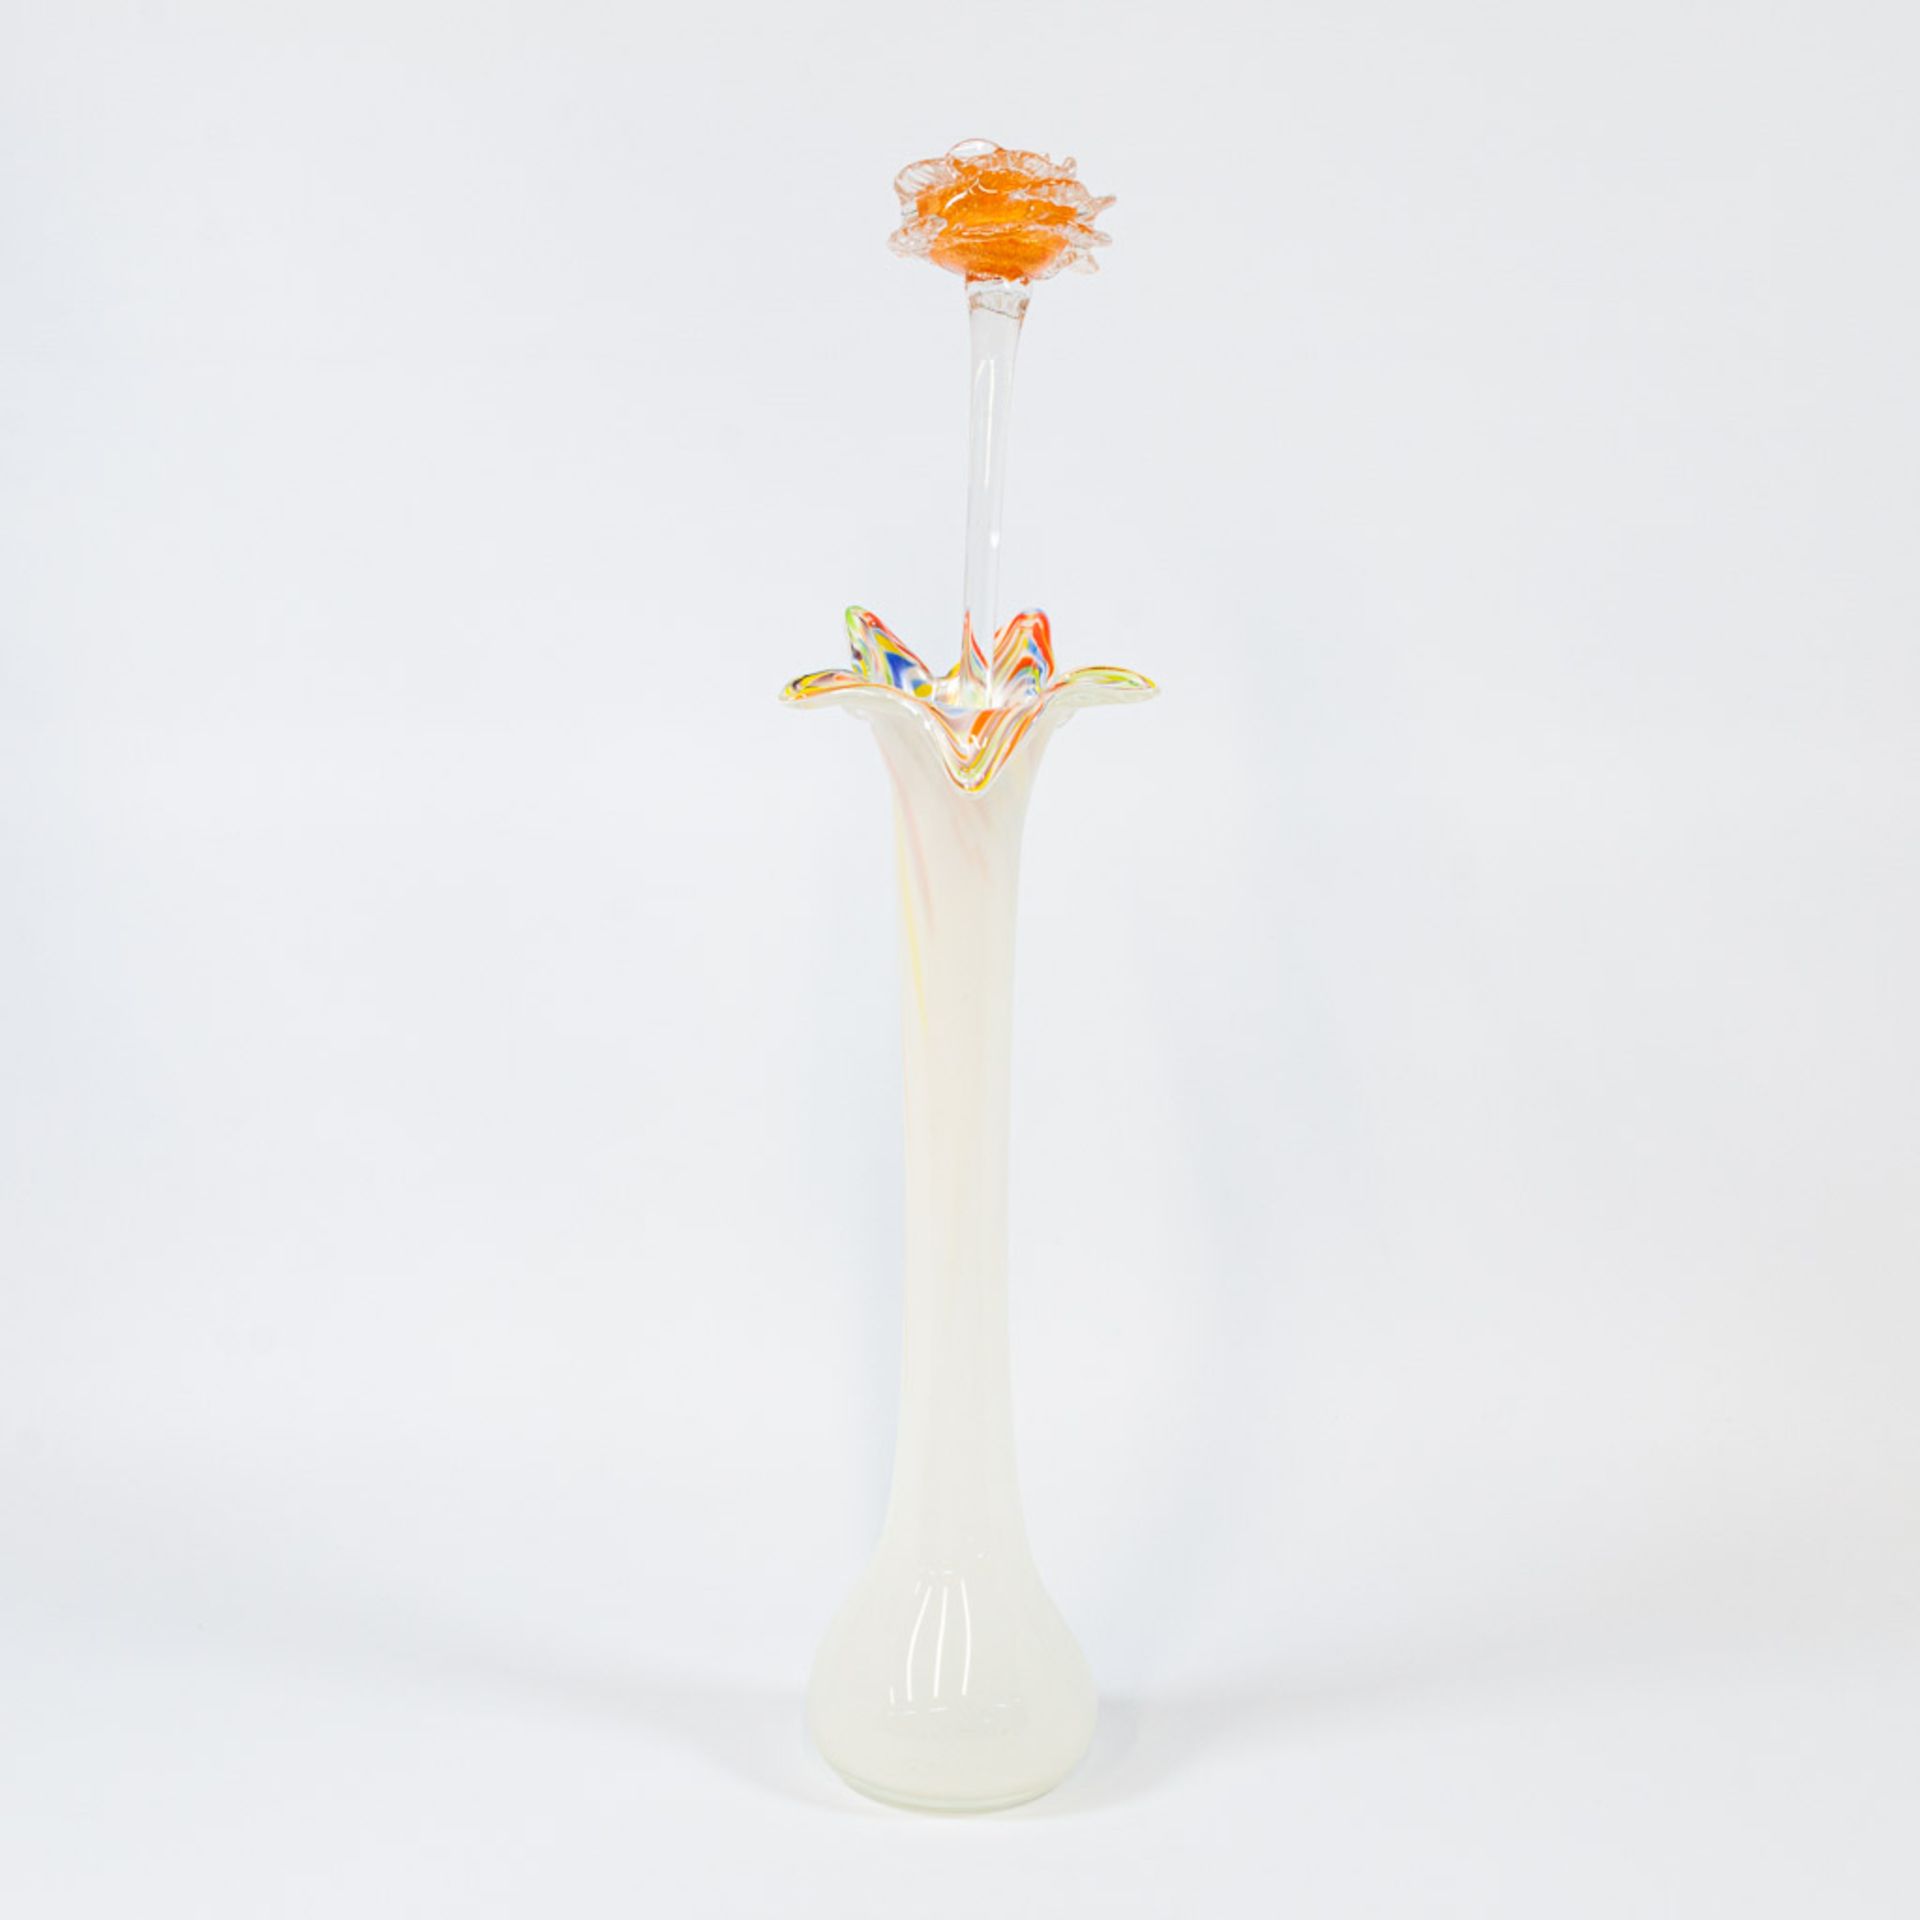 A collection of 4 vases and 4 glass flowers made in Murano, Italy. - Image 12 of 49